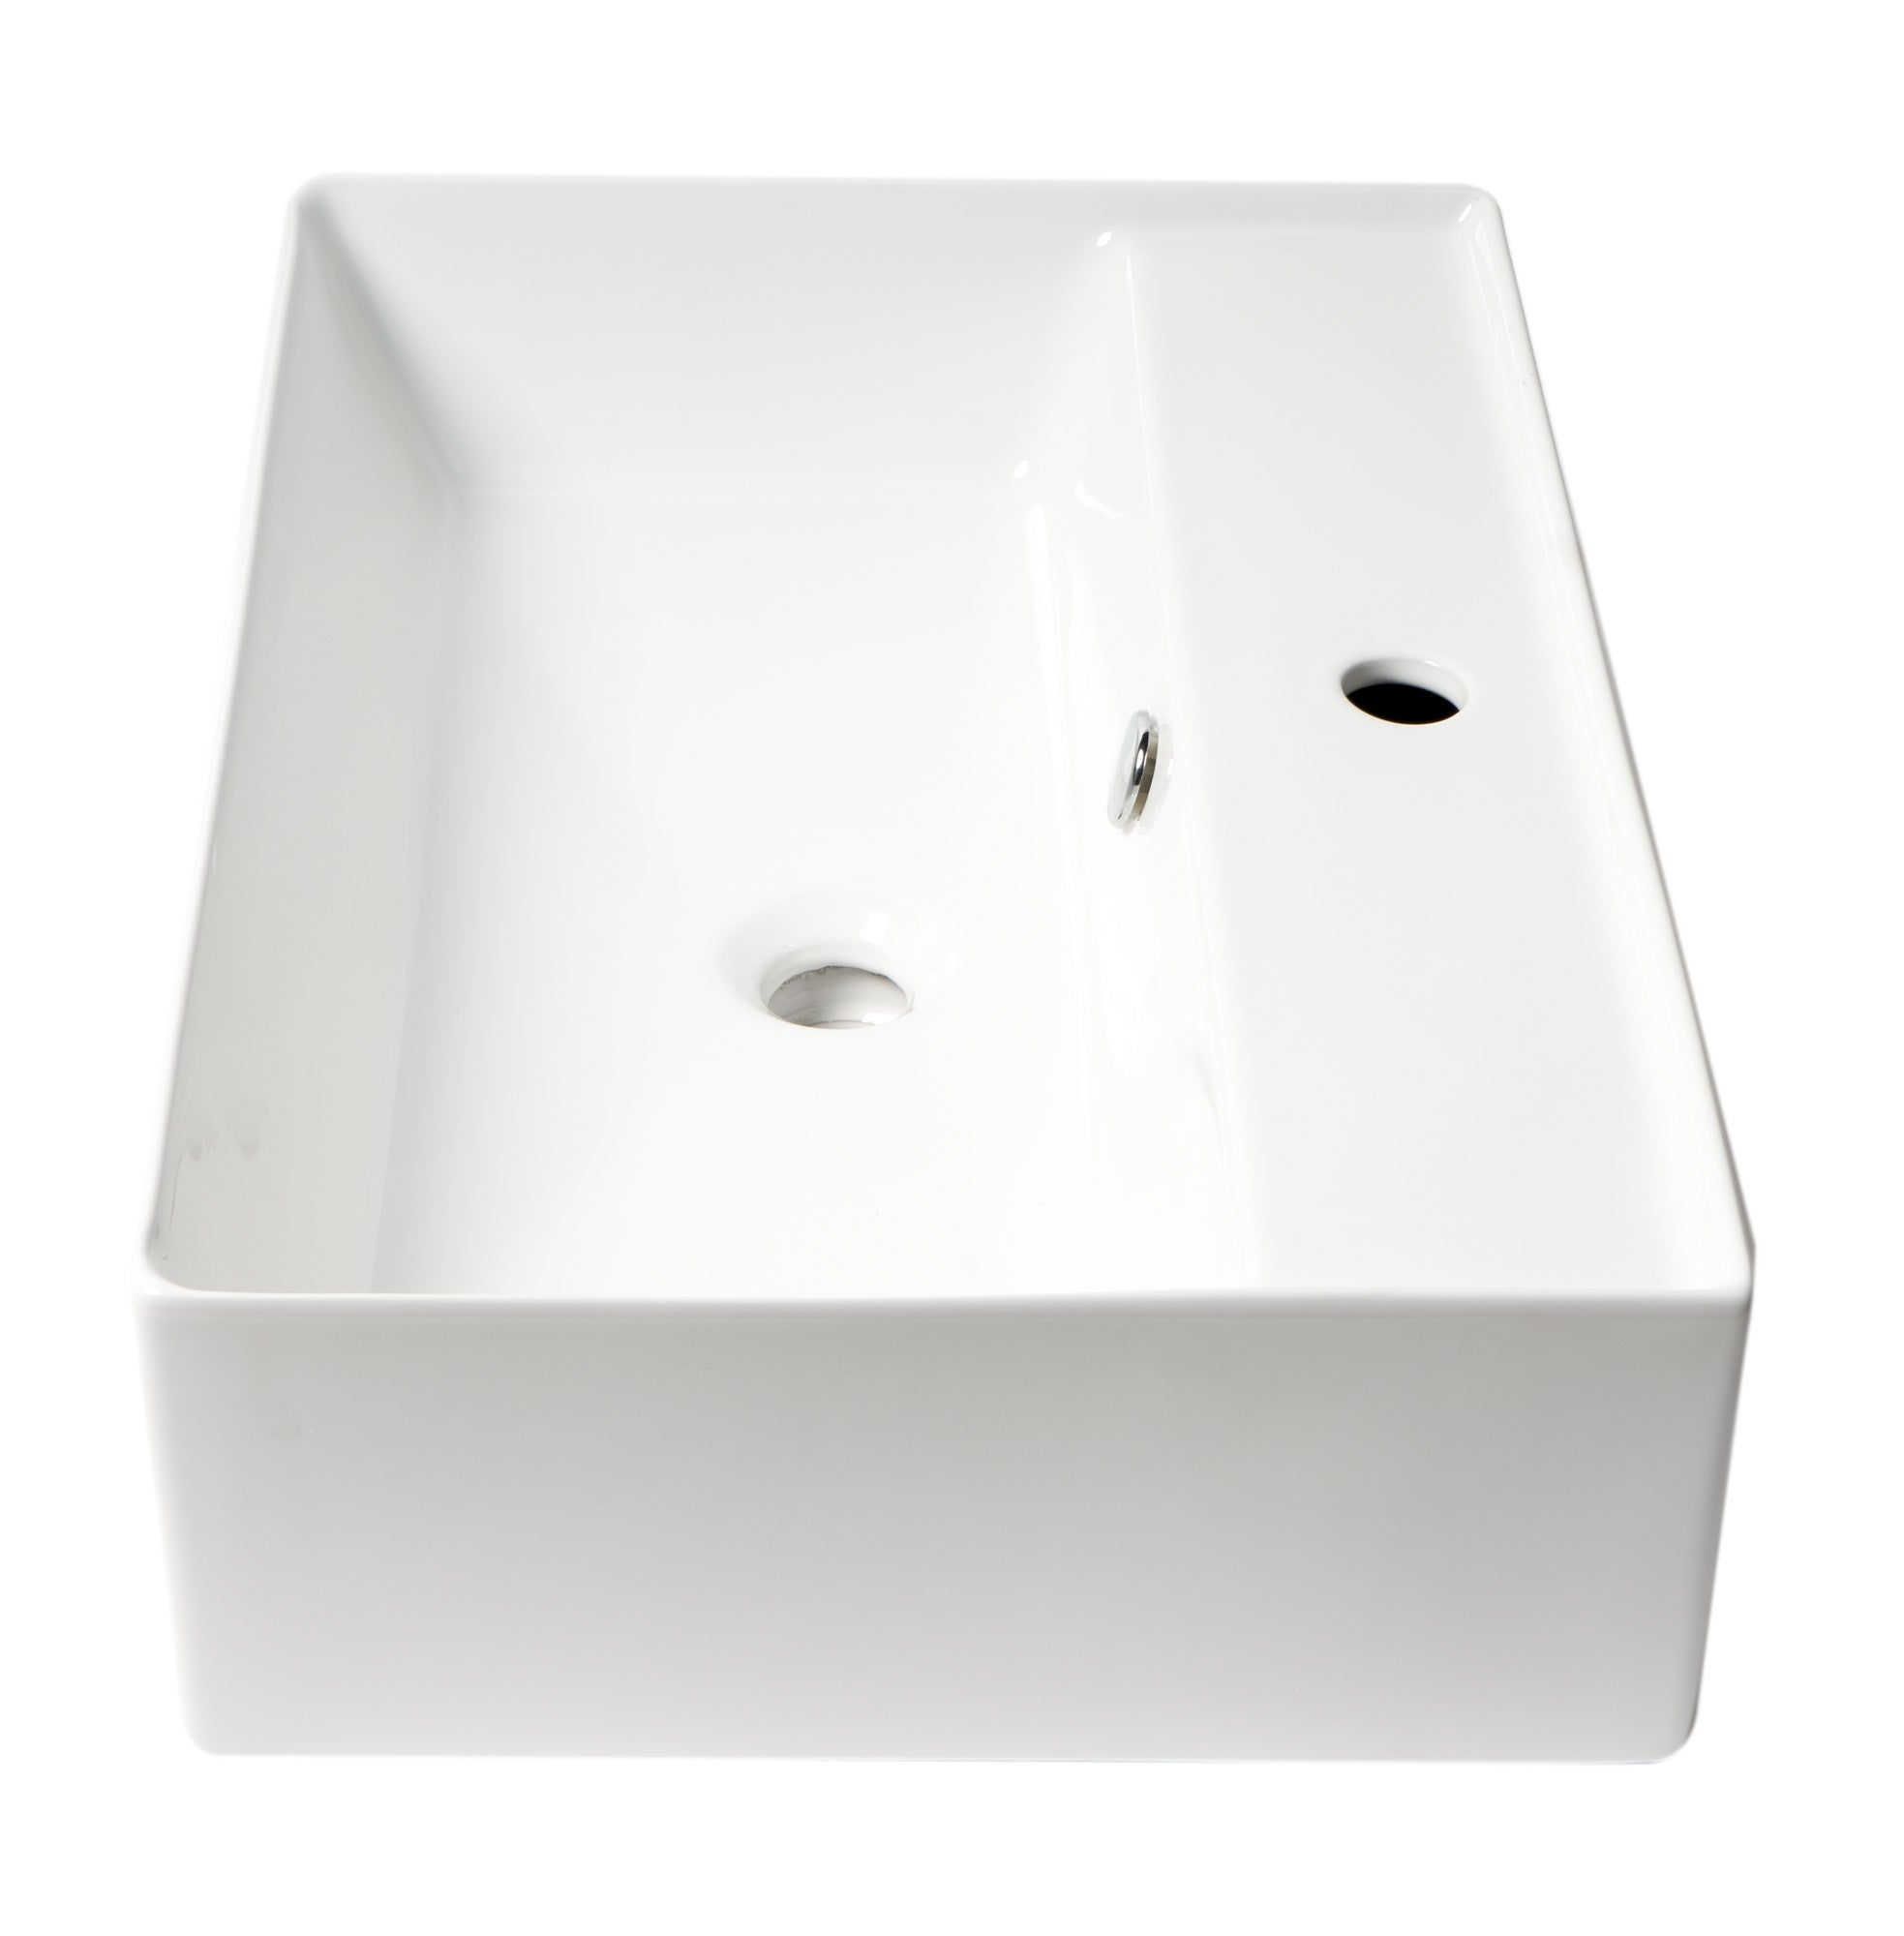 ALFI Brand - White 24" Modern Rectangular Above Mount Ceramic Sink with Faucet Hole | ABC901-W